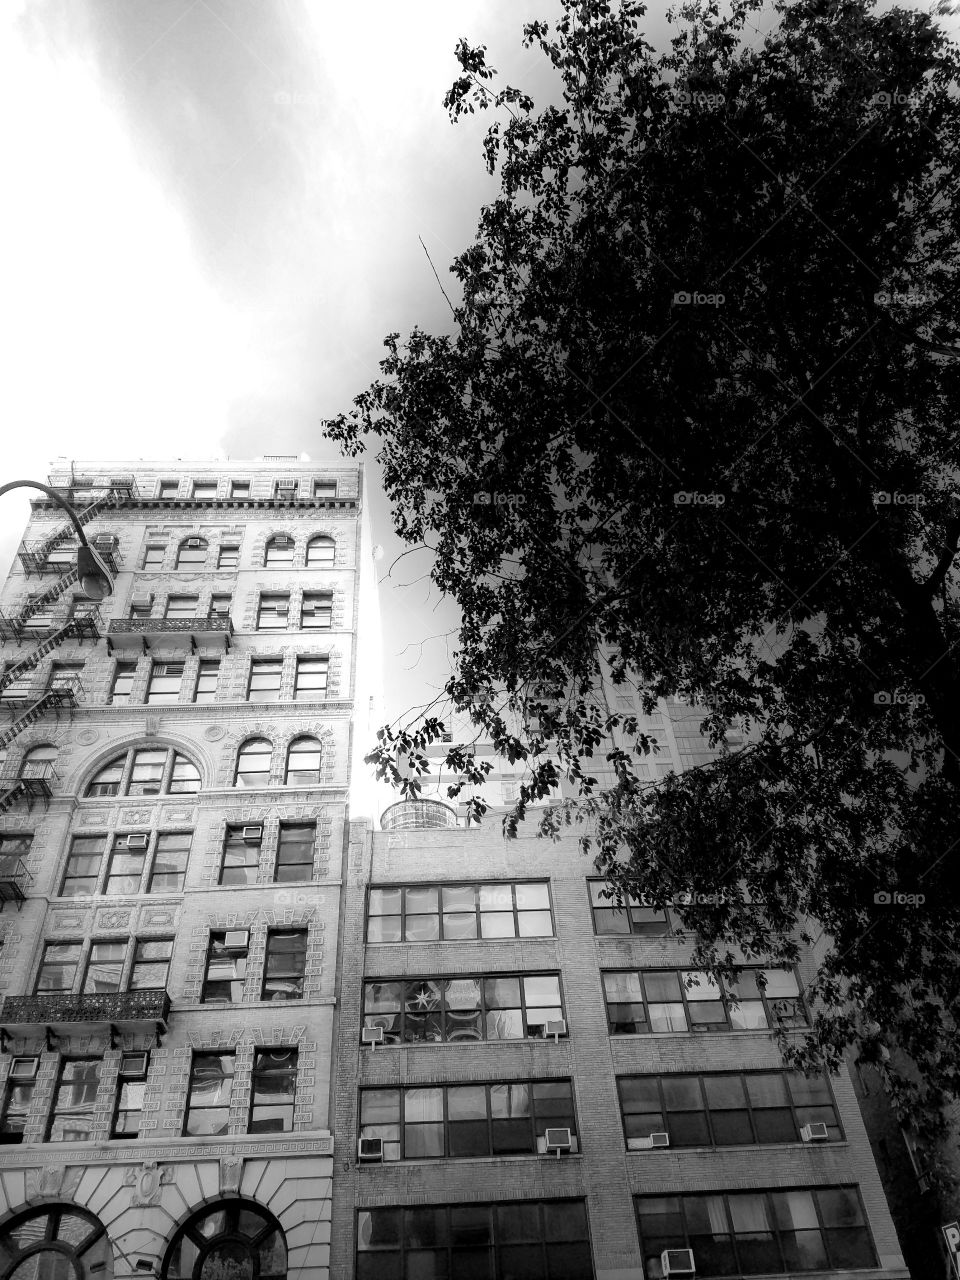 Building in Flatiron on 23rd street - Lower Manhattan. NYC Architecture. Black and White Filter.